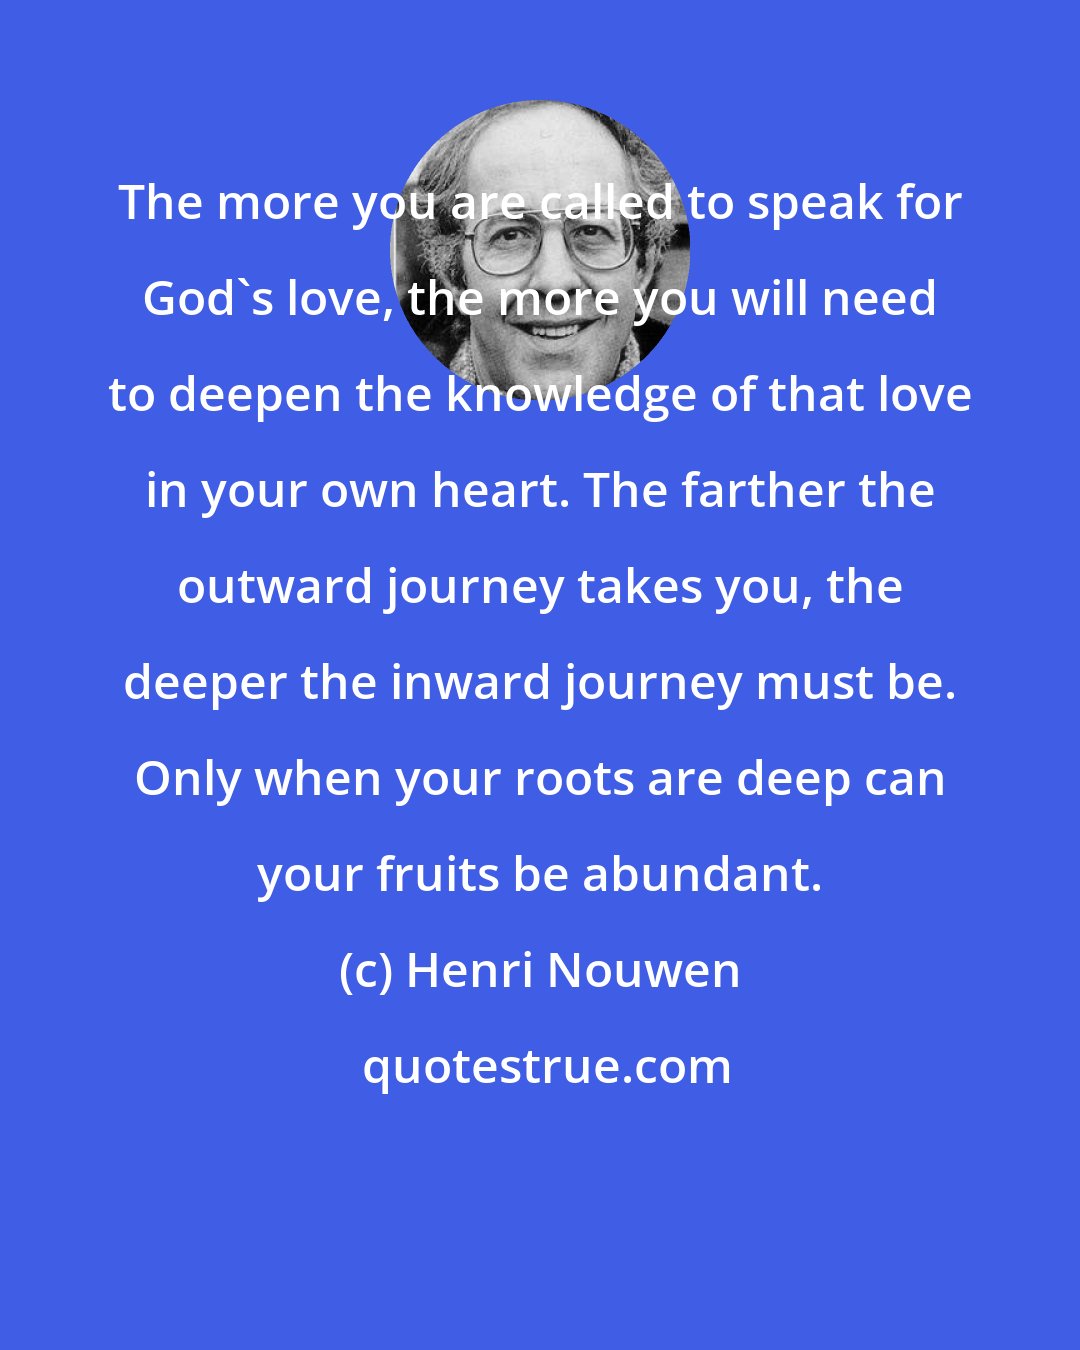 Henri Nouwen: The more you are called to speak for God's love, the more you will need to deepen the knowledge of that love in your own heart. The farther the outward journey takes you, the deeper the inward journey must be. Only when your roots are deep can your fruits be abundant.